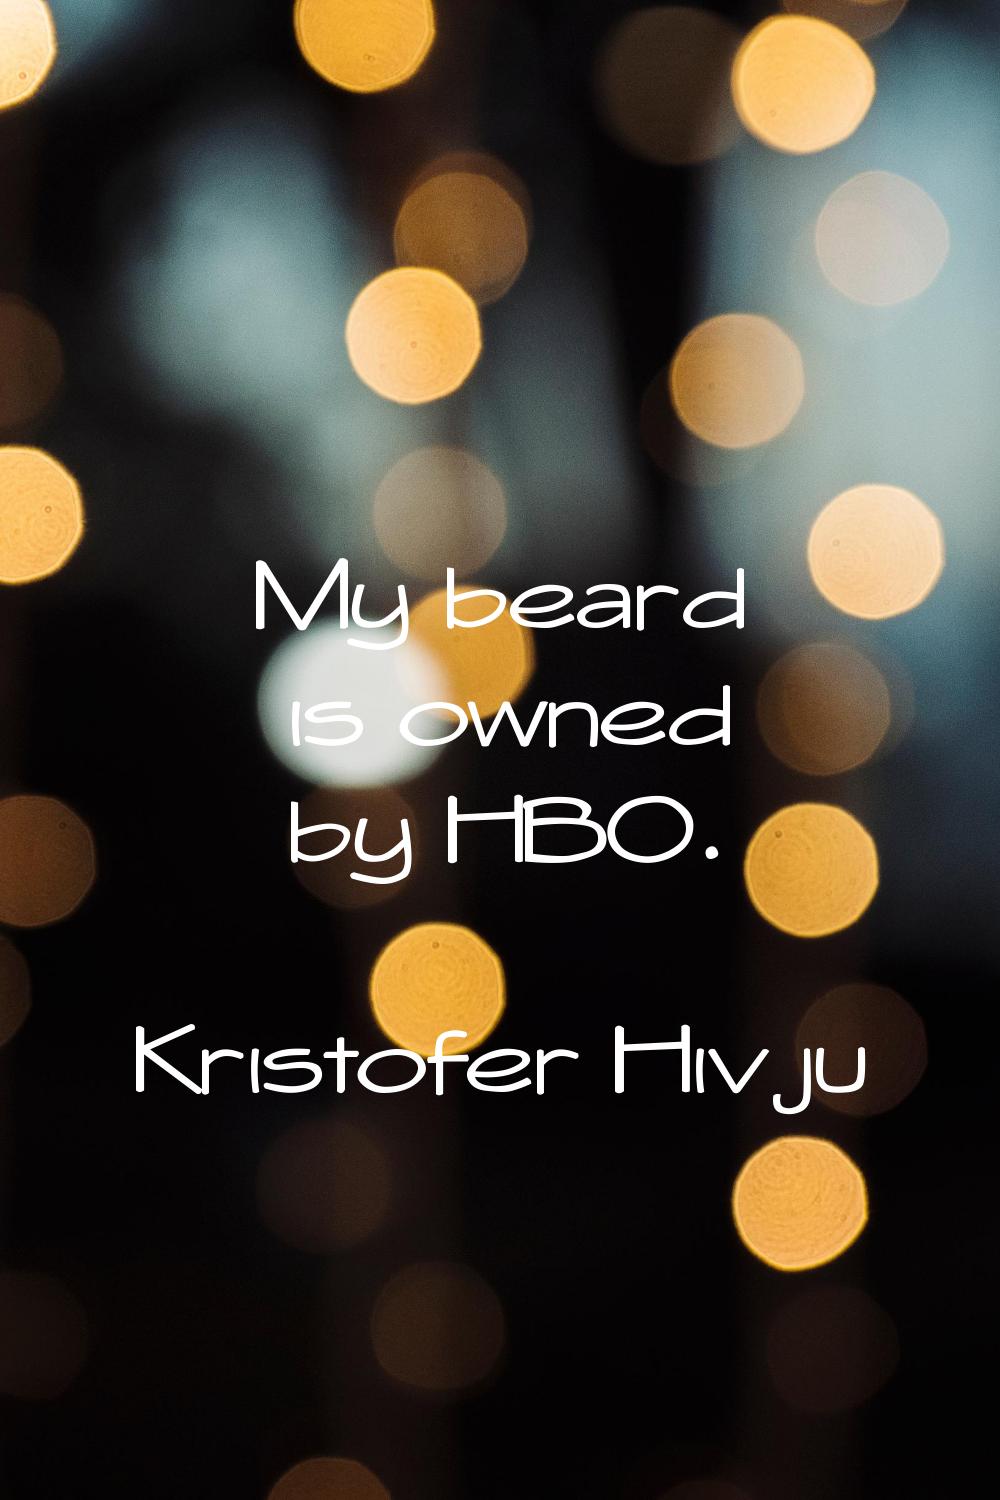 My beard is owned by HBO.